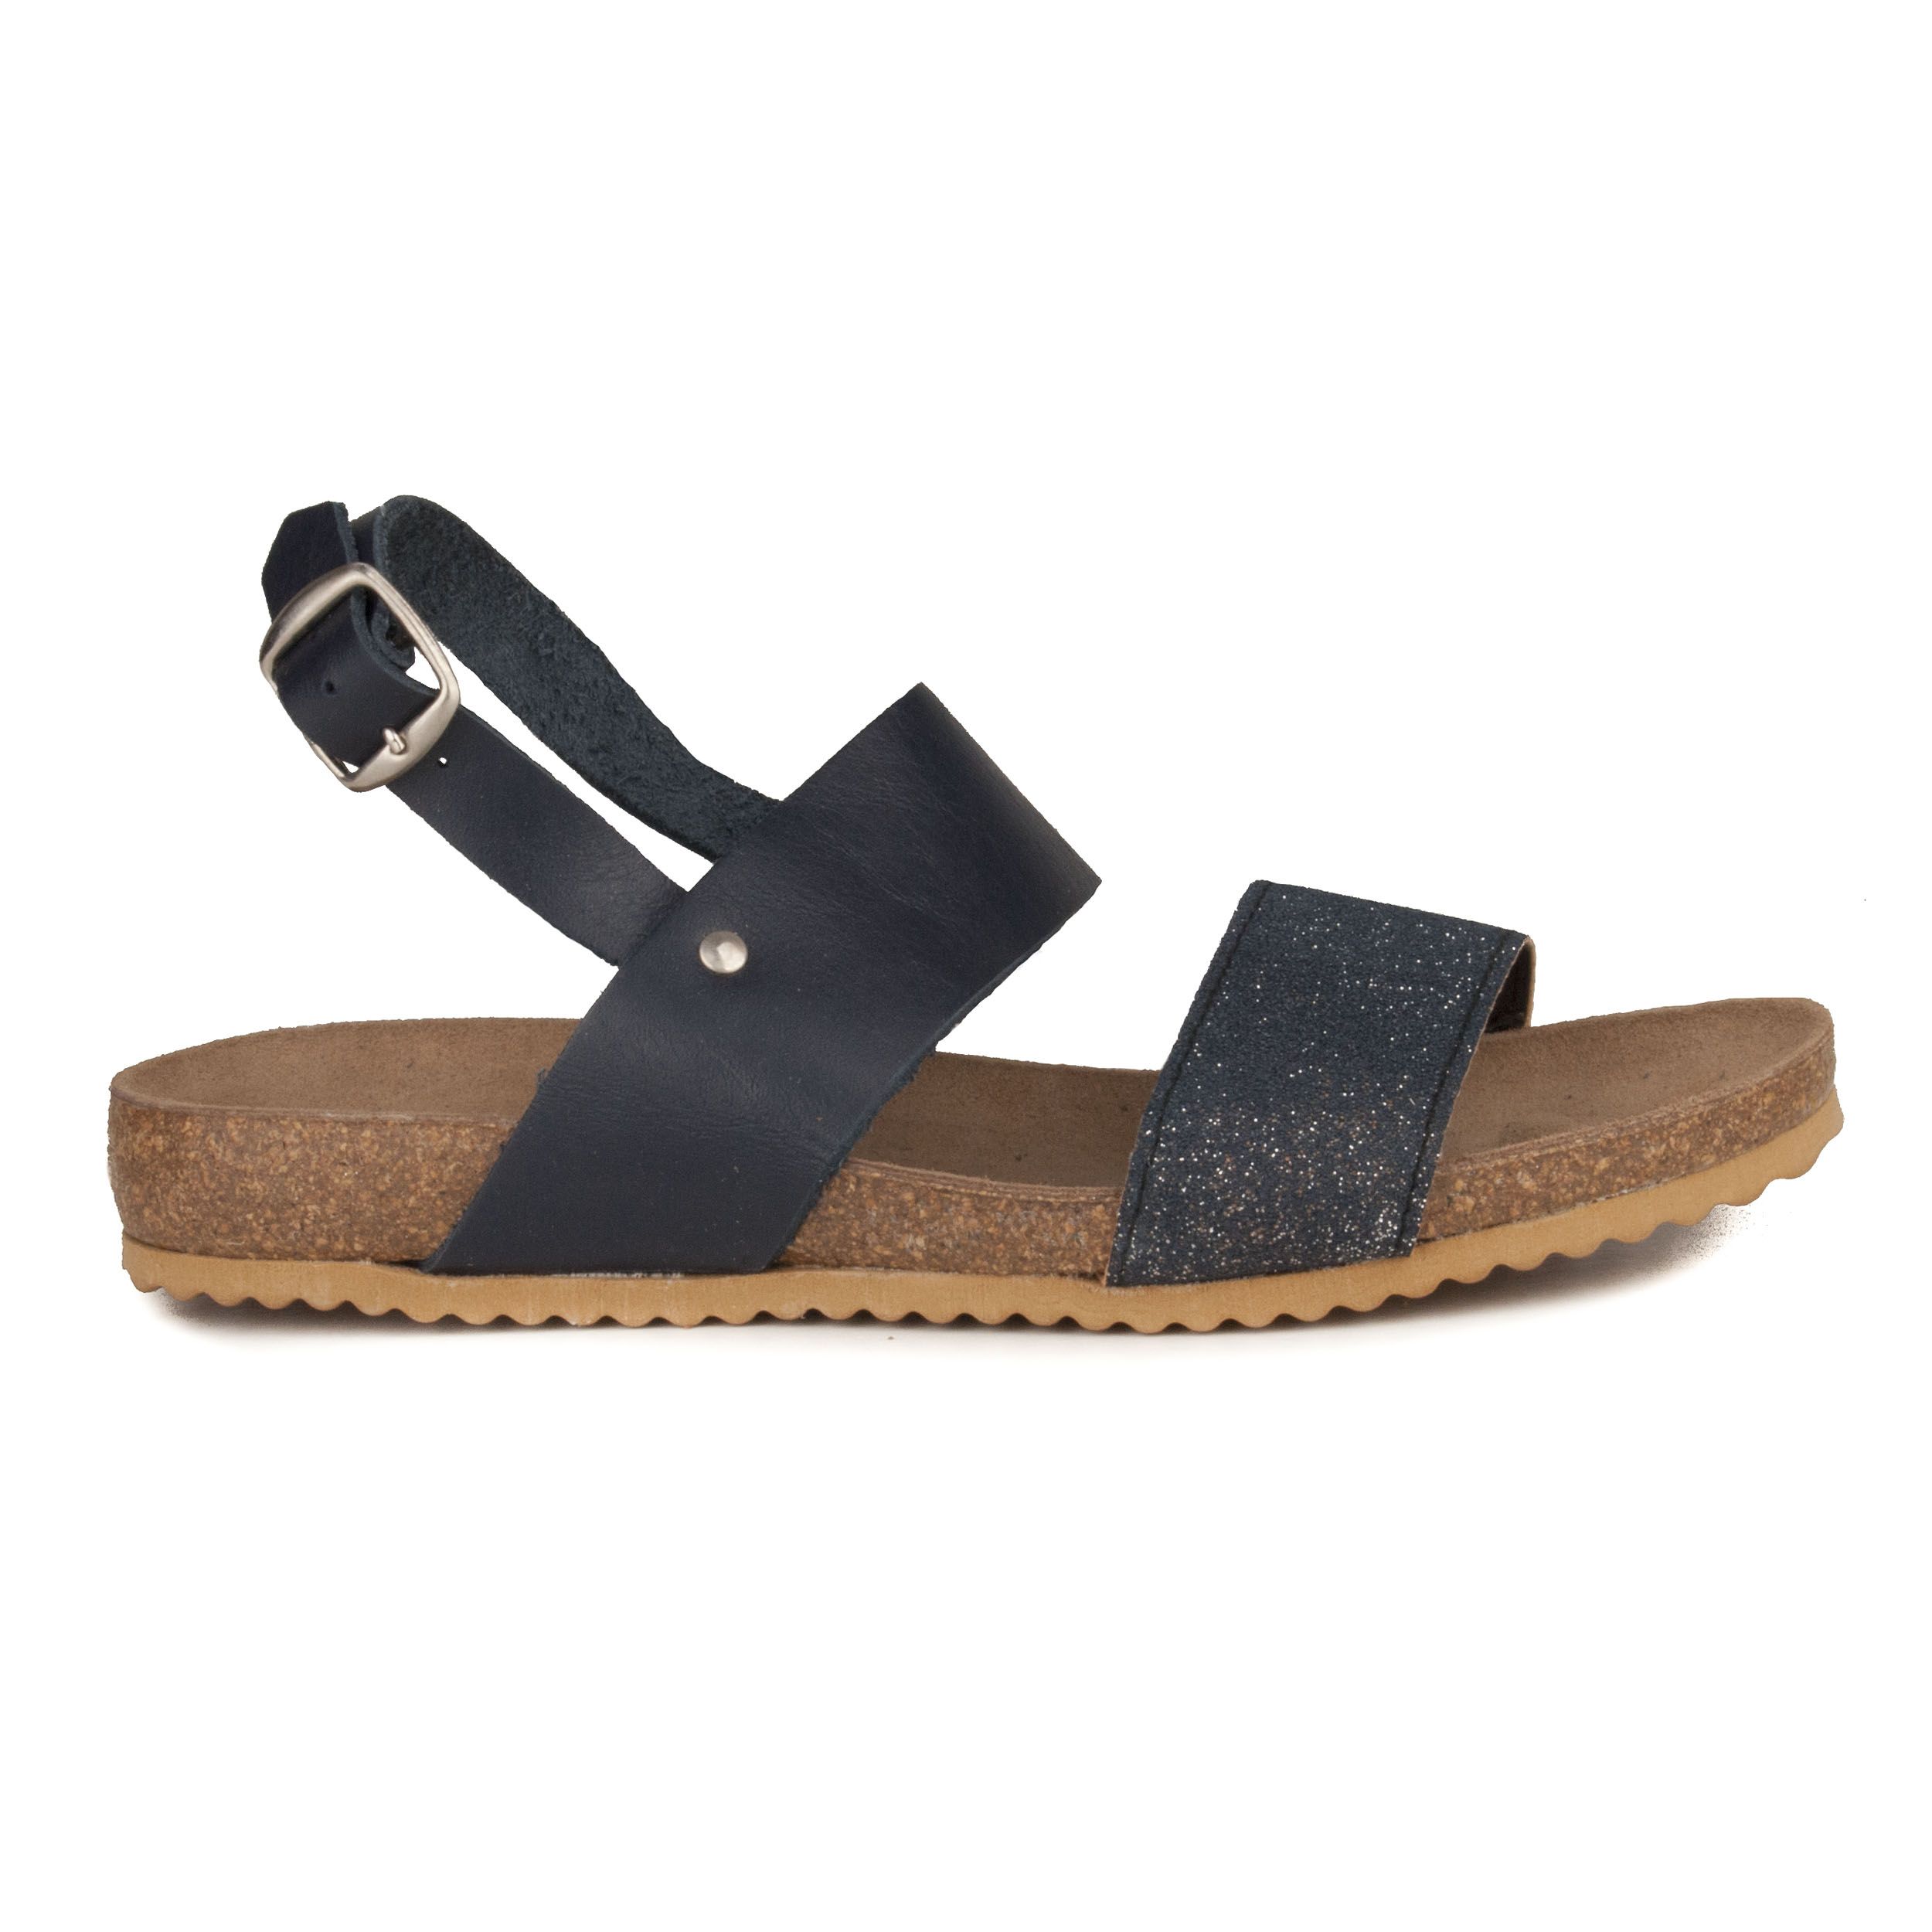 Despite its simplicity you will see how this sandal made of skin is extremely comfortable thanks to its Bio plant and the Eva rubber floor, which makes the star sandal because it does not weigh nothing, it is super light. Walking with this sandal will be very comfortable. Close on the ankle. Style and elegant.